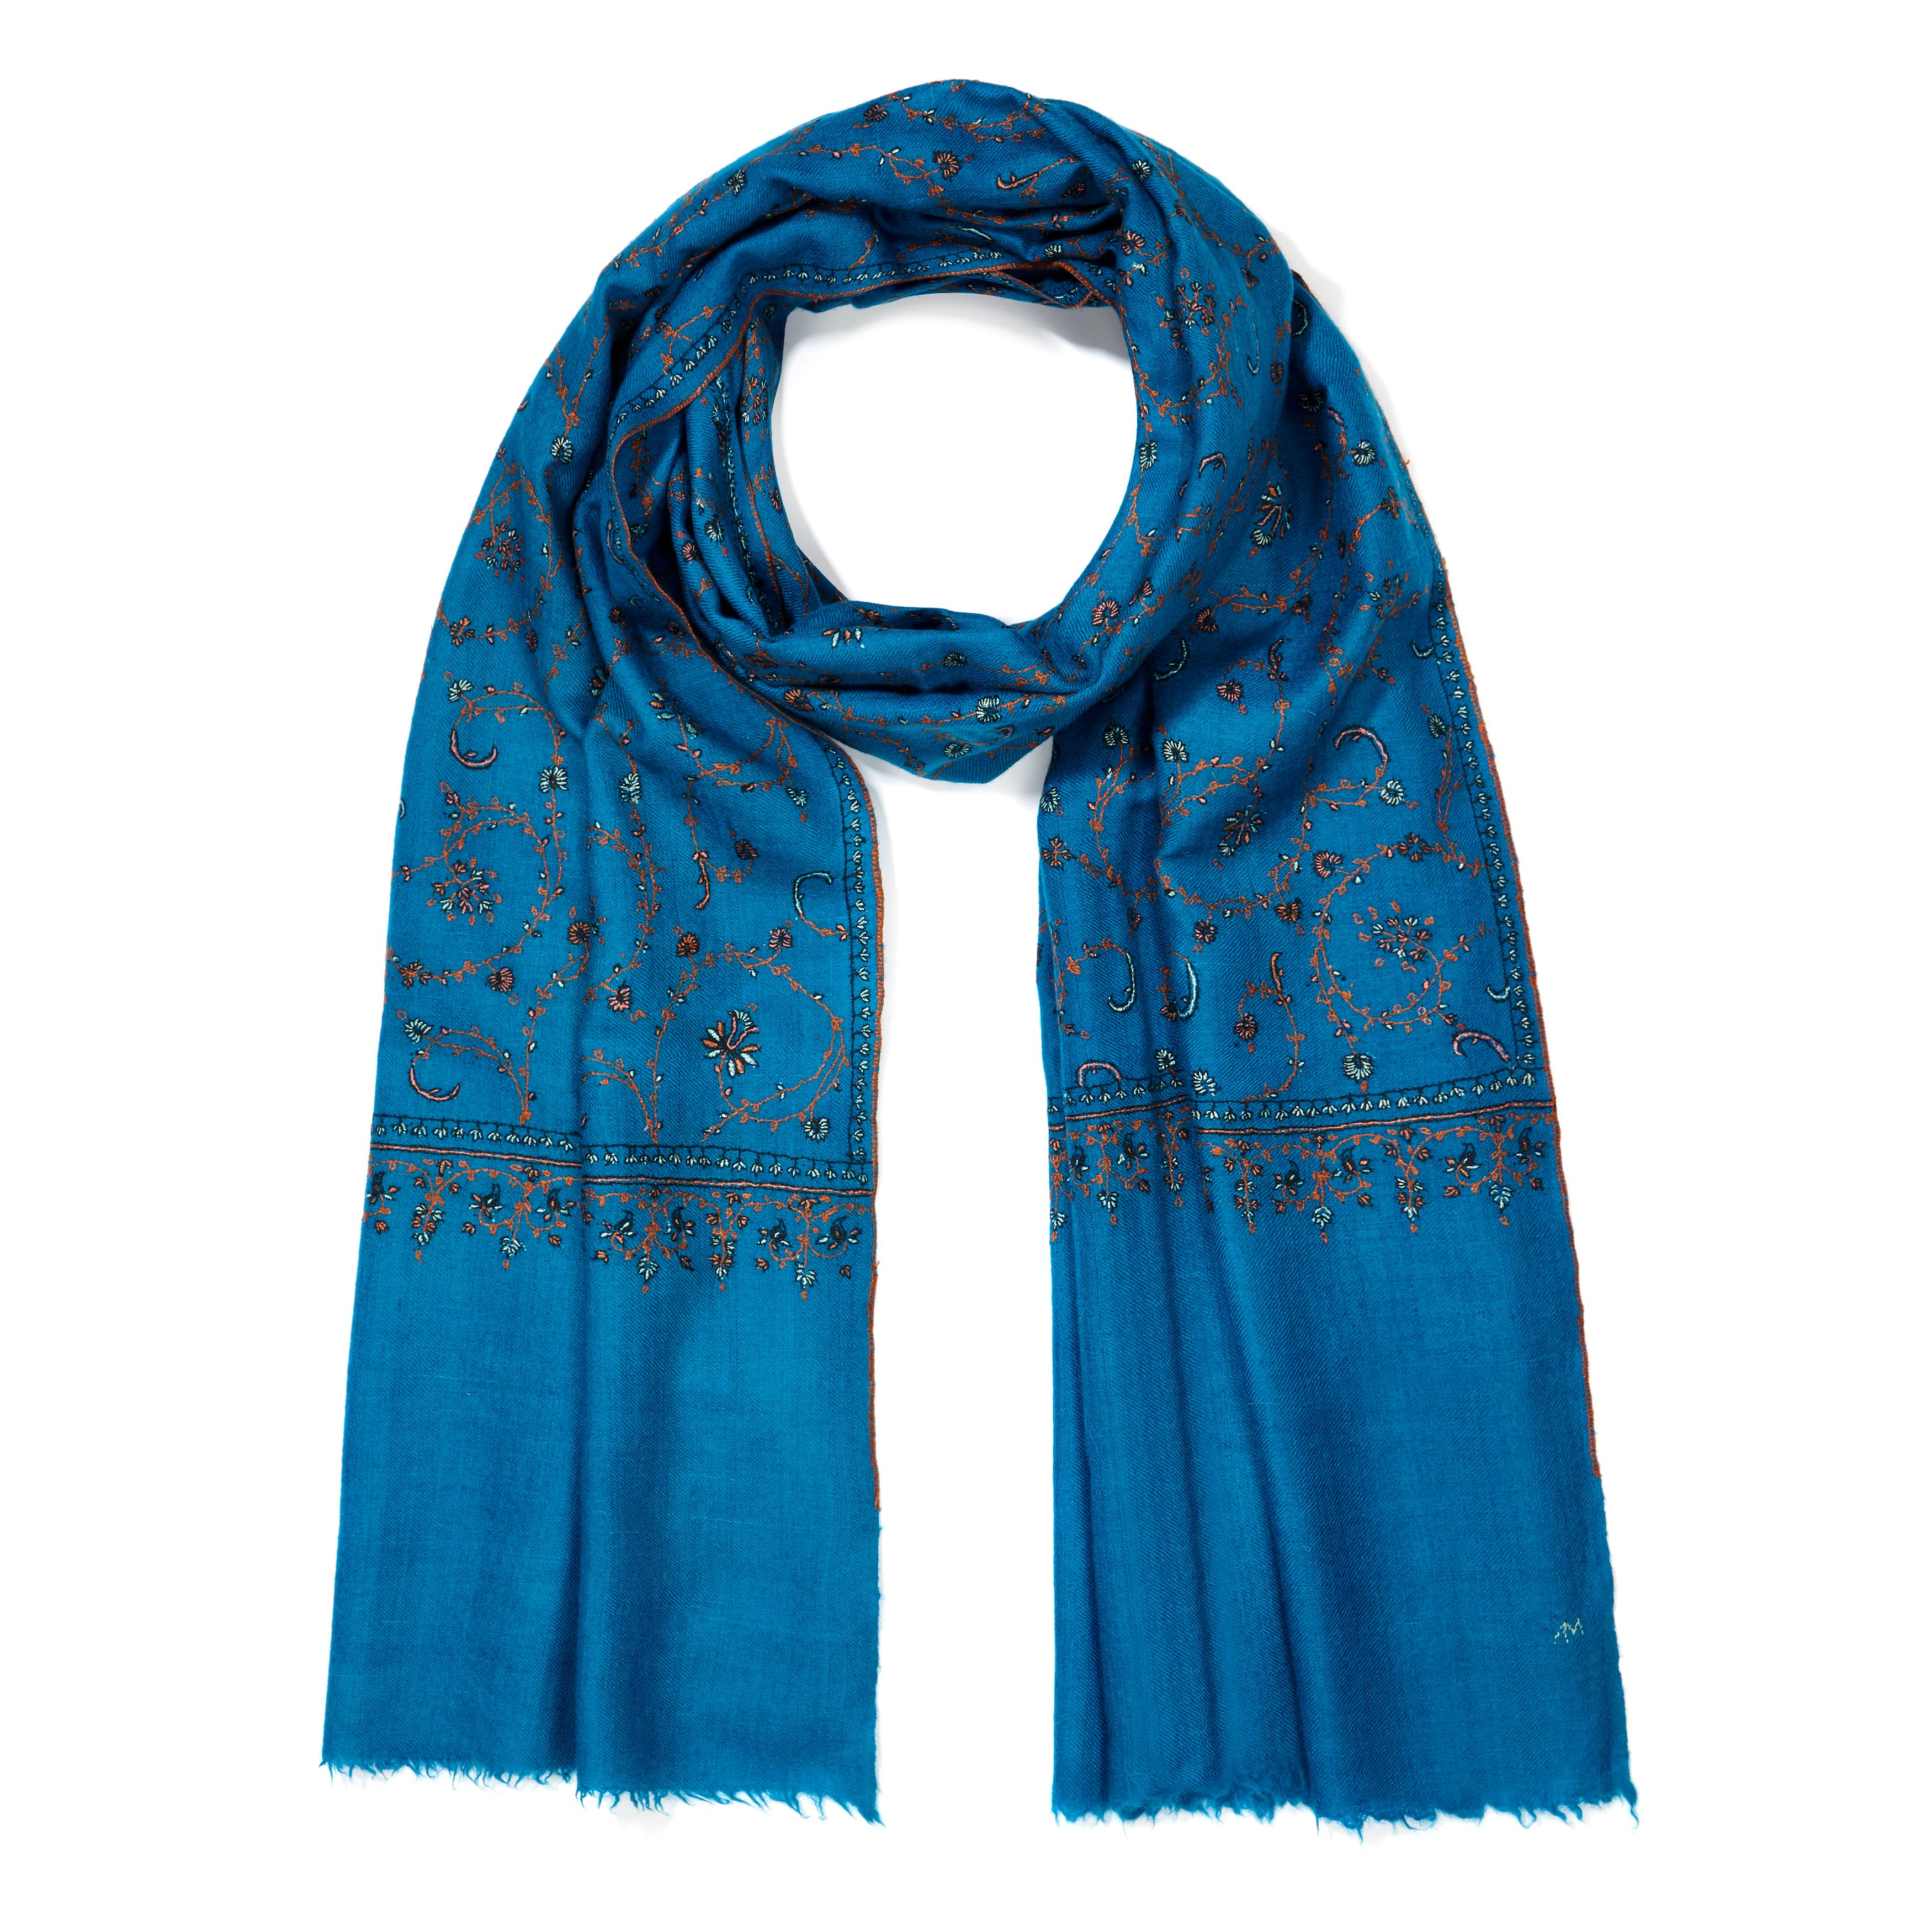 The perfect Christmas gift for someone special - this shawl is unique and handmade. 
Verheyen London’s shawl is spun from the finest embroidered woven in 100% cashmere from Kashmir.  The embroidery can take up to 1 year to embroider these shawls and